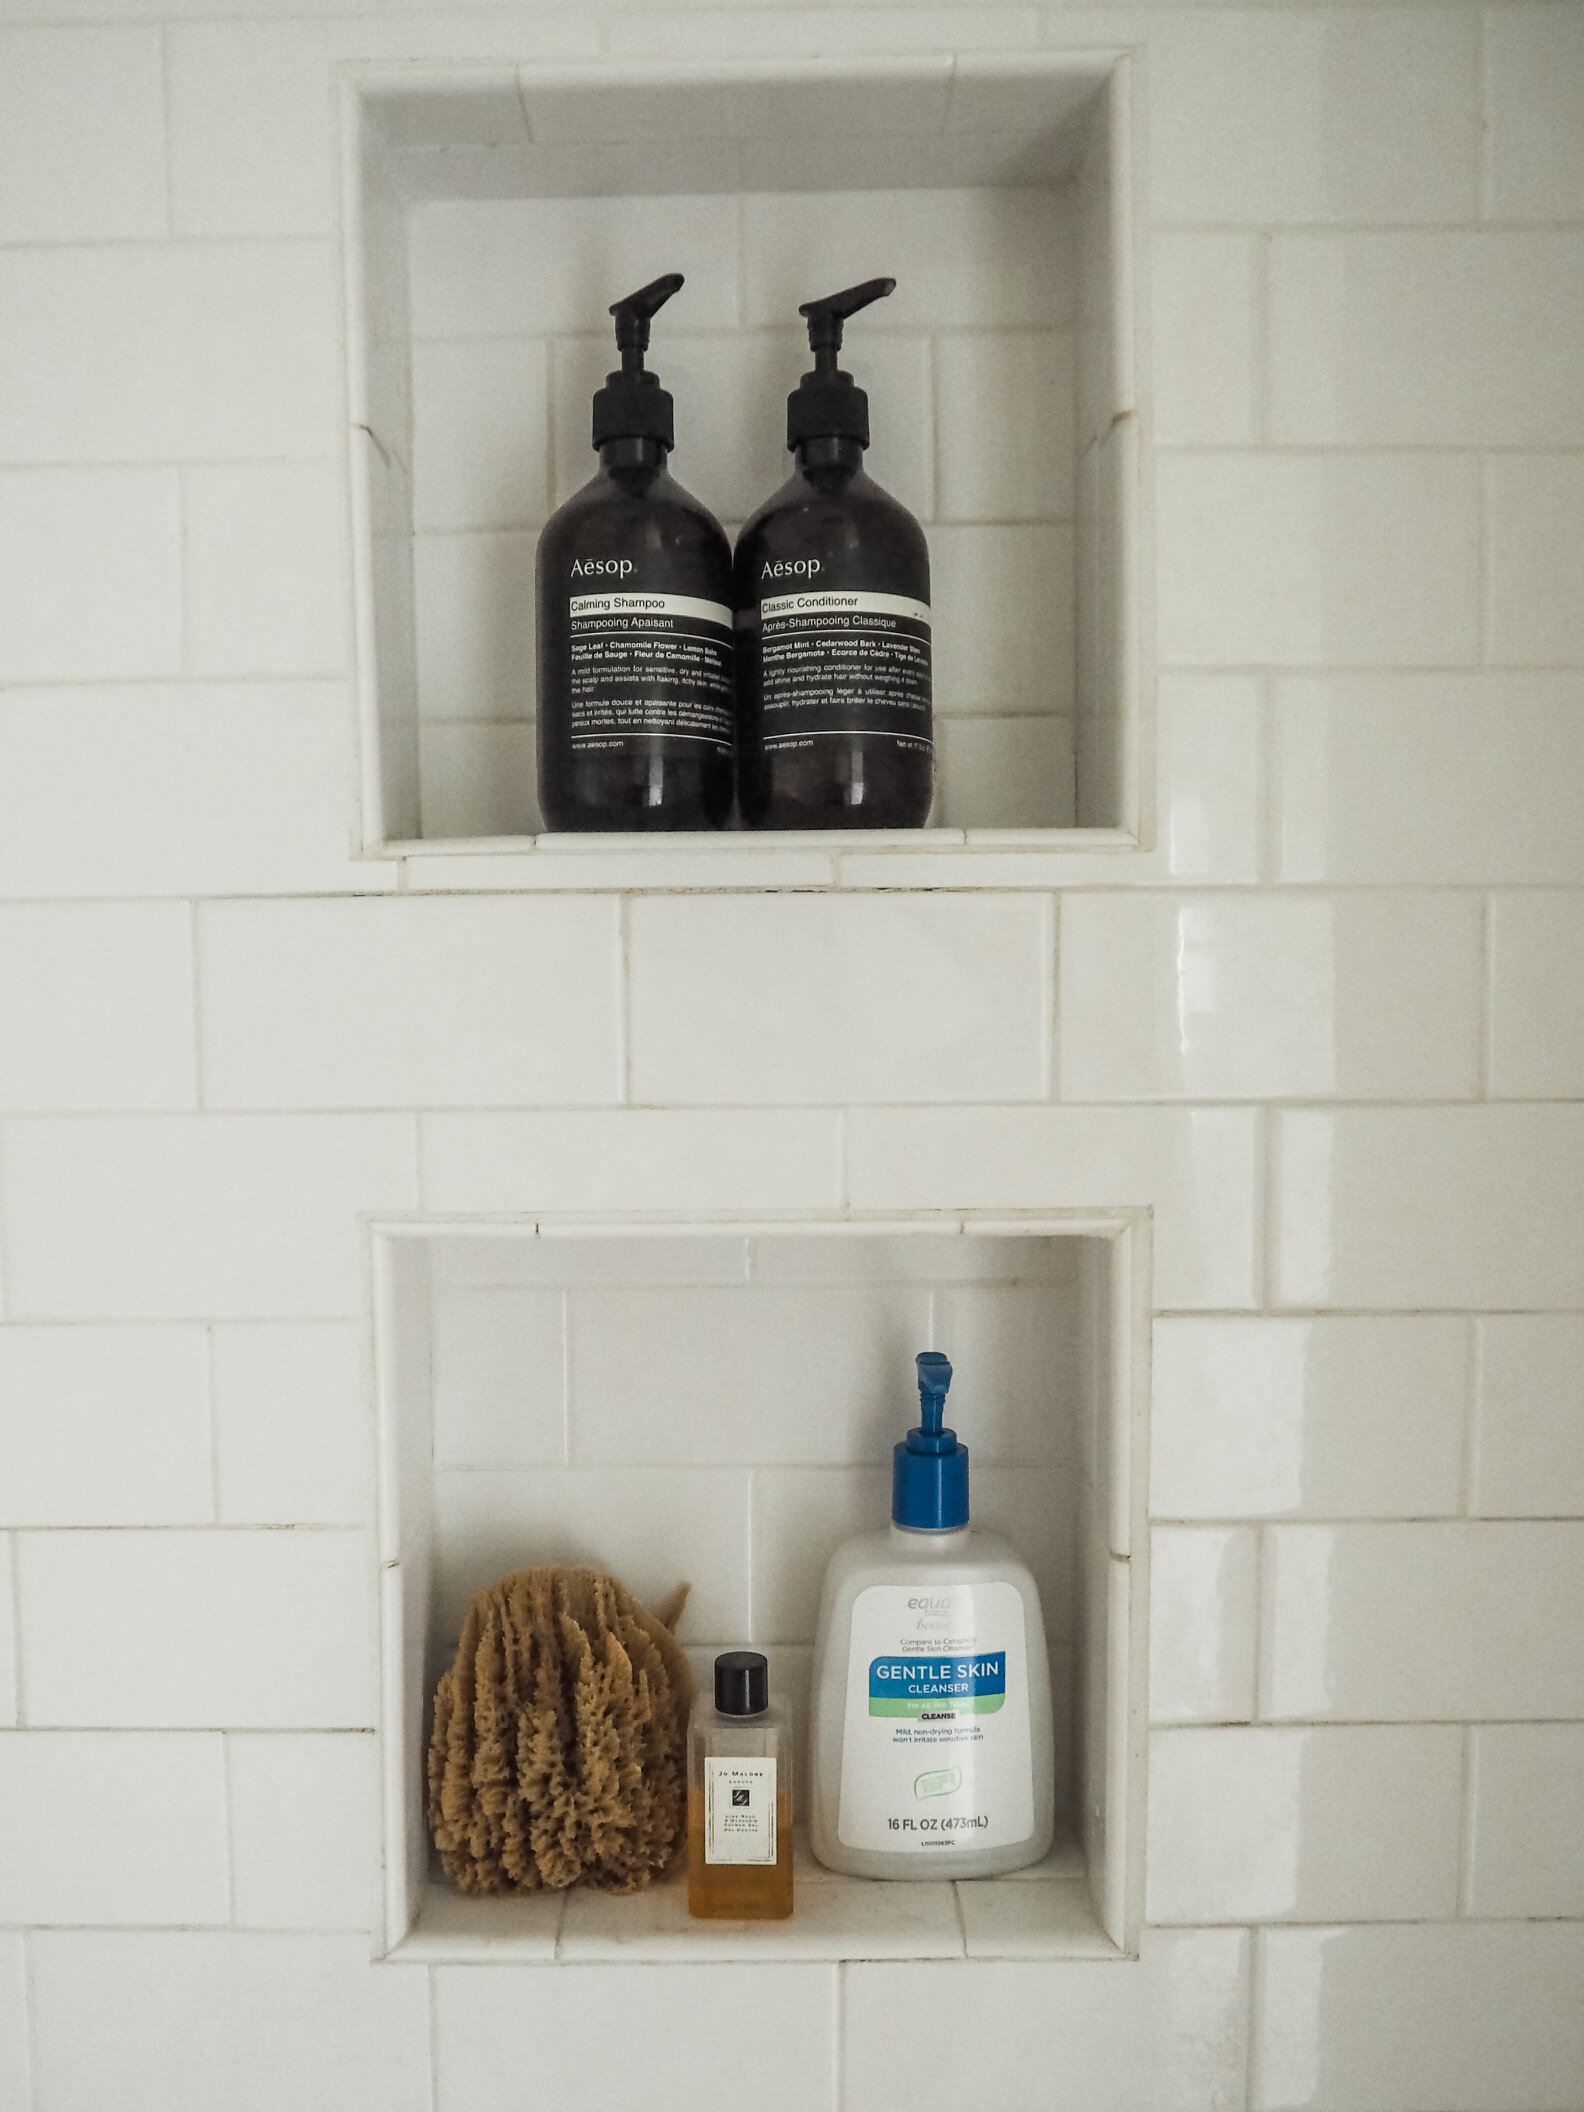 Minimal shower products